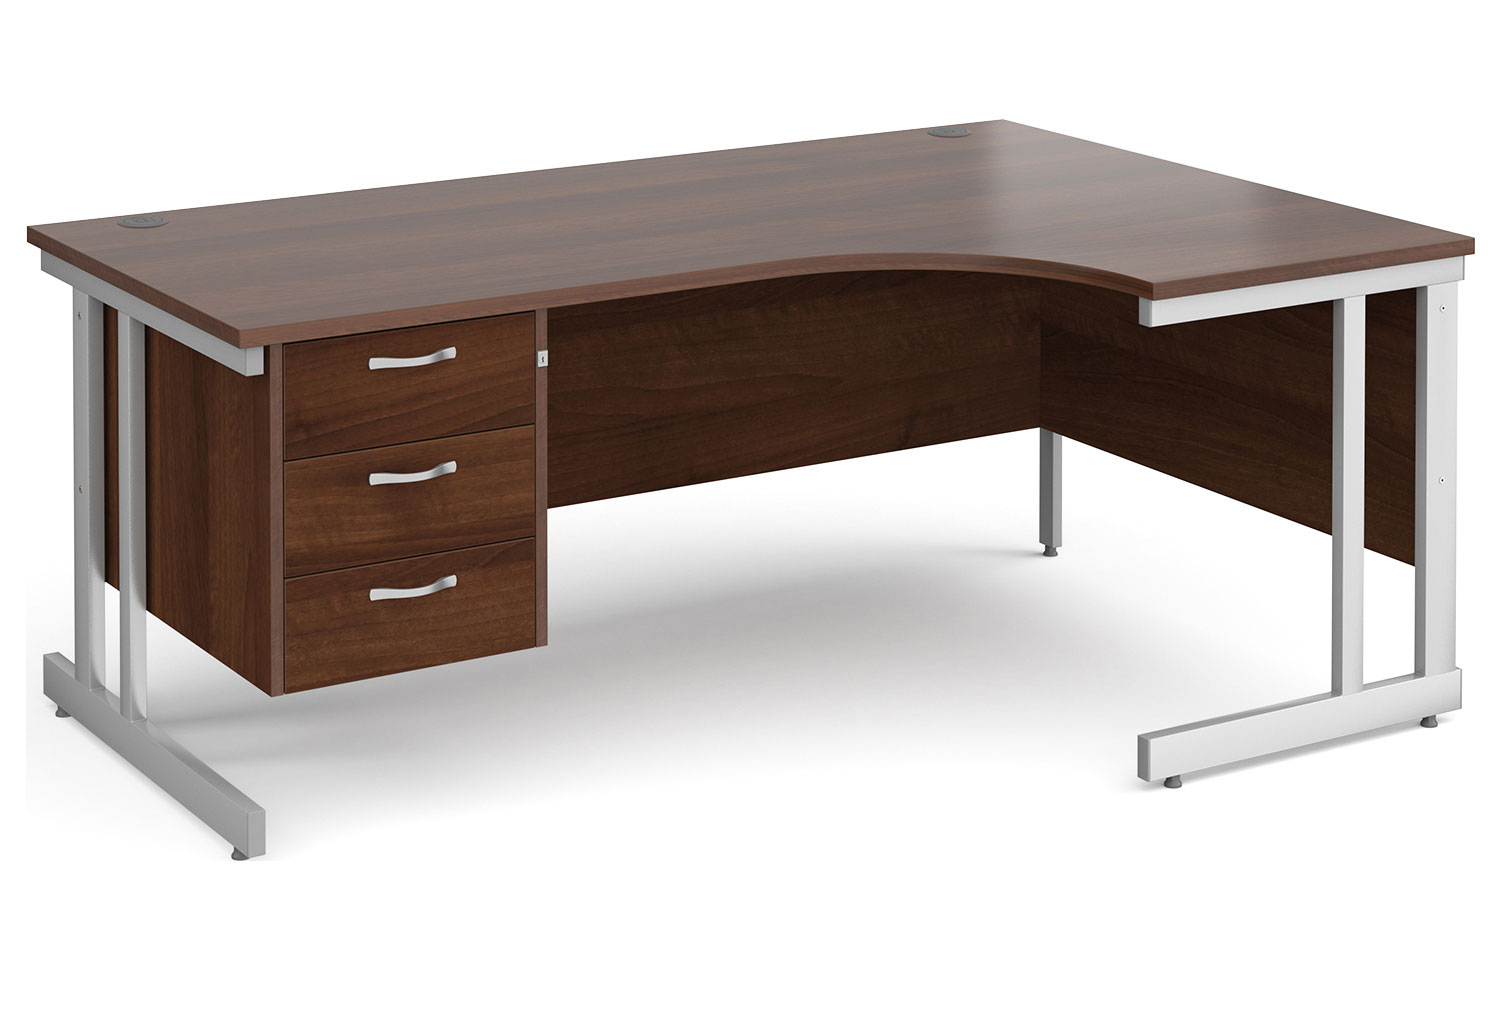 Tully II Right Hand Ergonomic Office Desk 3 Drawers, 180wx120/80dx73h (cm), Walnut, Express Delivery